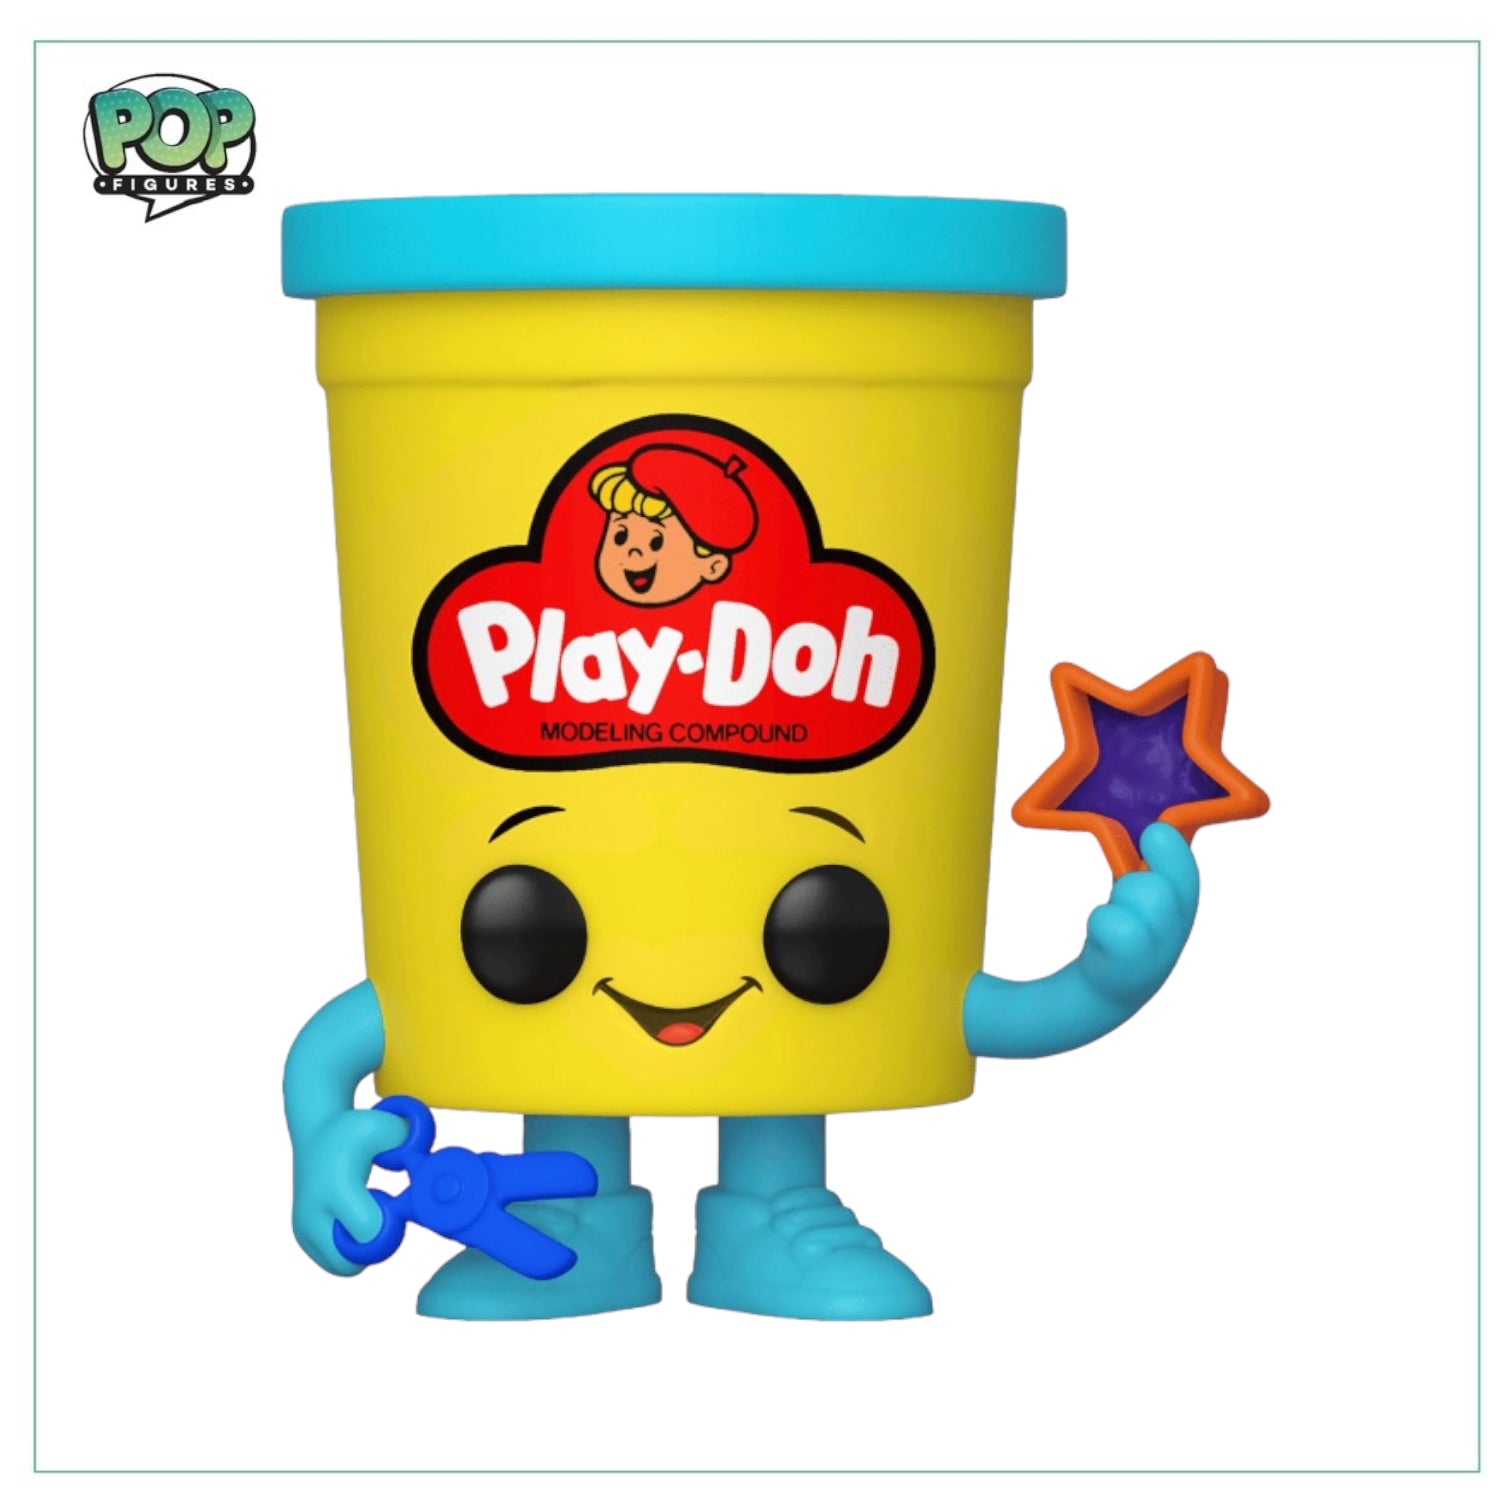 Play-Doh Container #101 Funko Pop! - Play-Doh